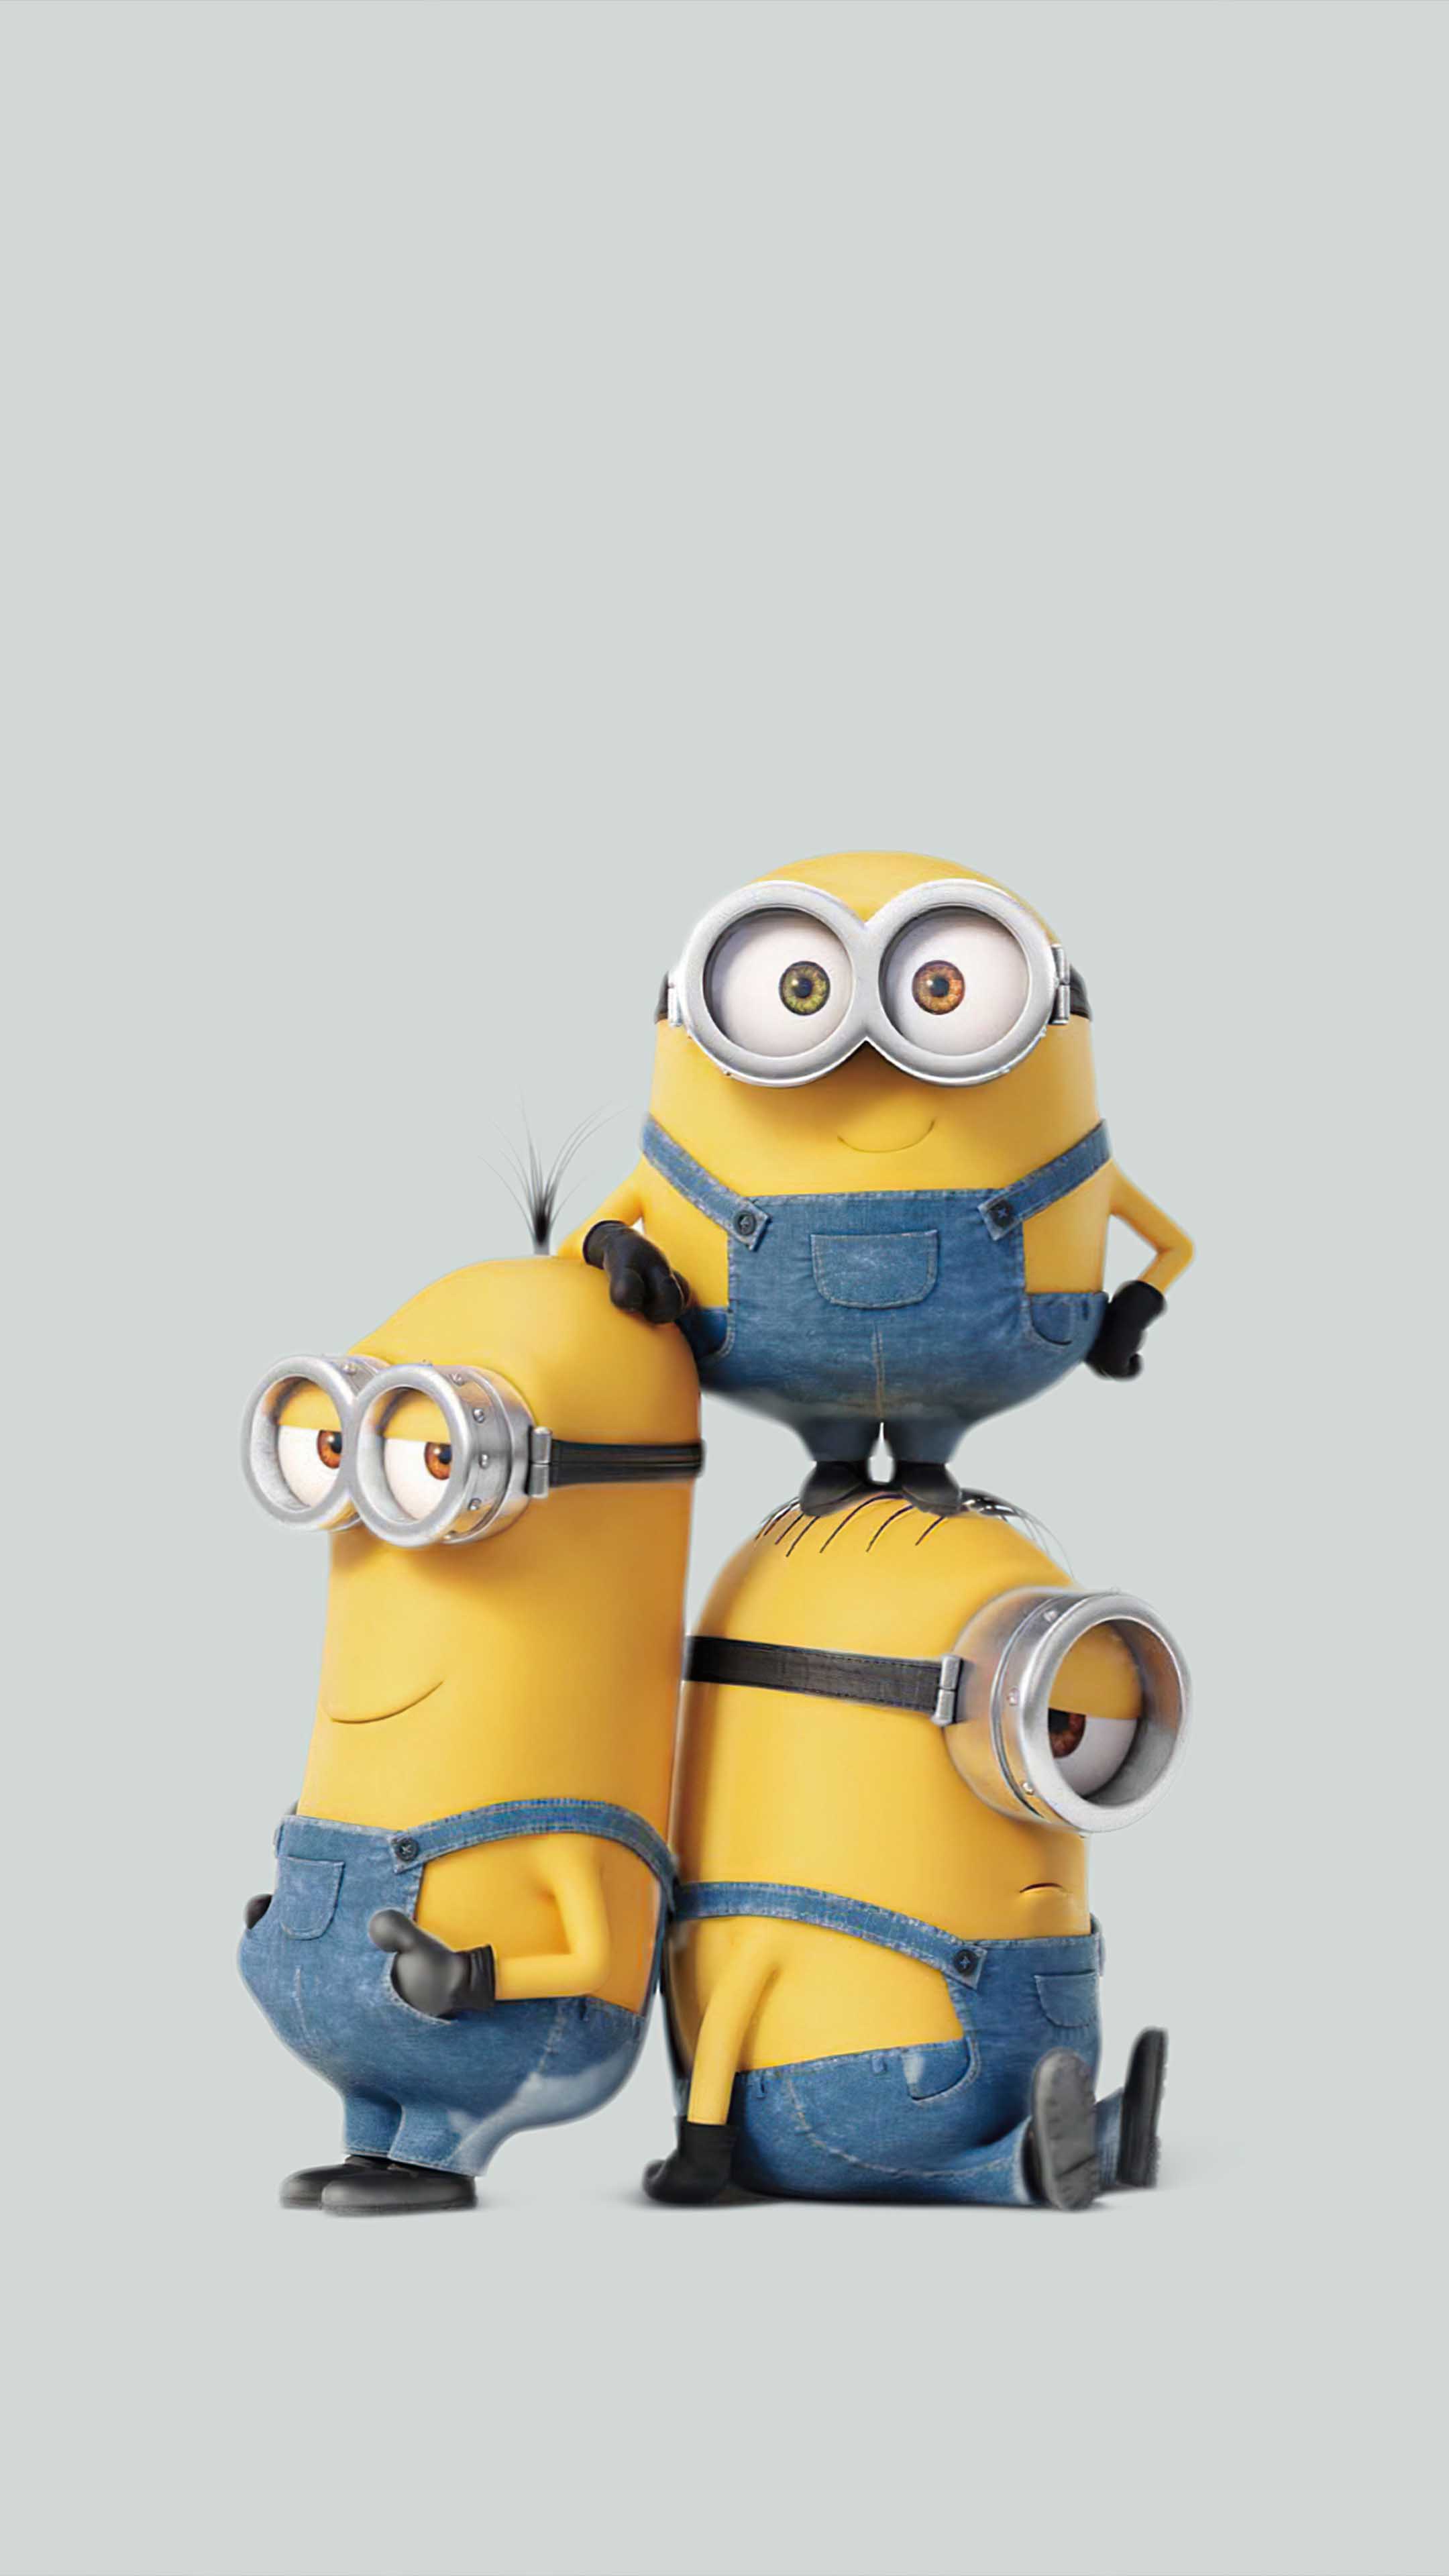 Free download Minions The Rise of Gru 4K Ultra HD Mobile Wallpaper [2160x3840] for your Desktop, Mobile & Tablet. Explore Wallpaper Minions. Minions Wallpaper, Minions Background Wallpaper, HD Minions Wallpaper